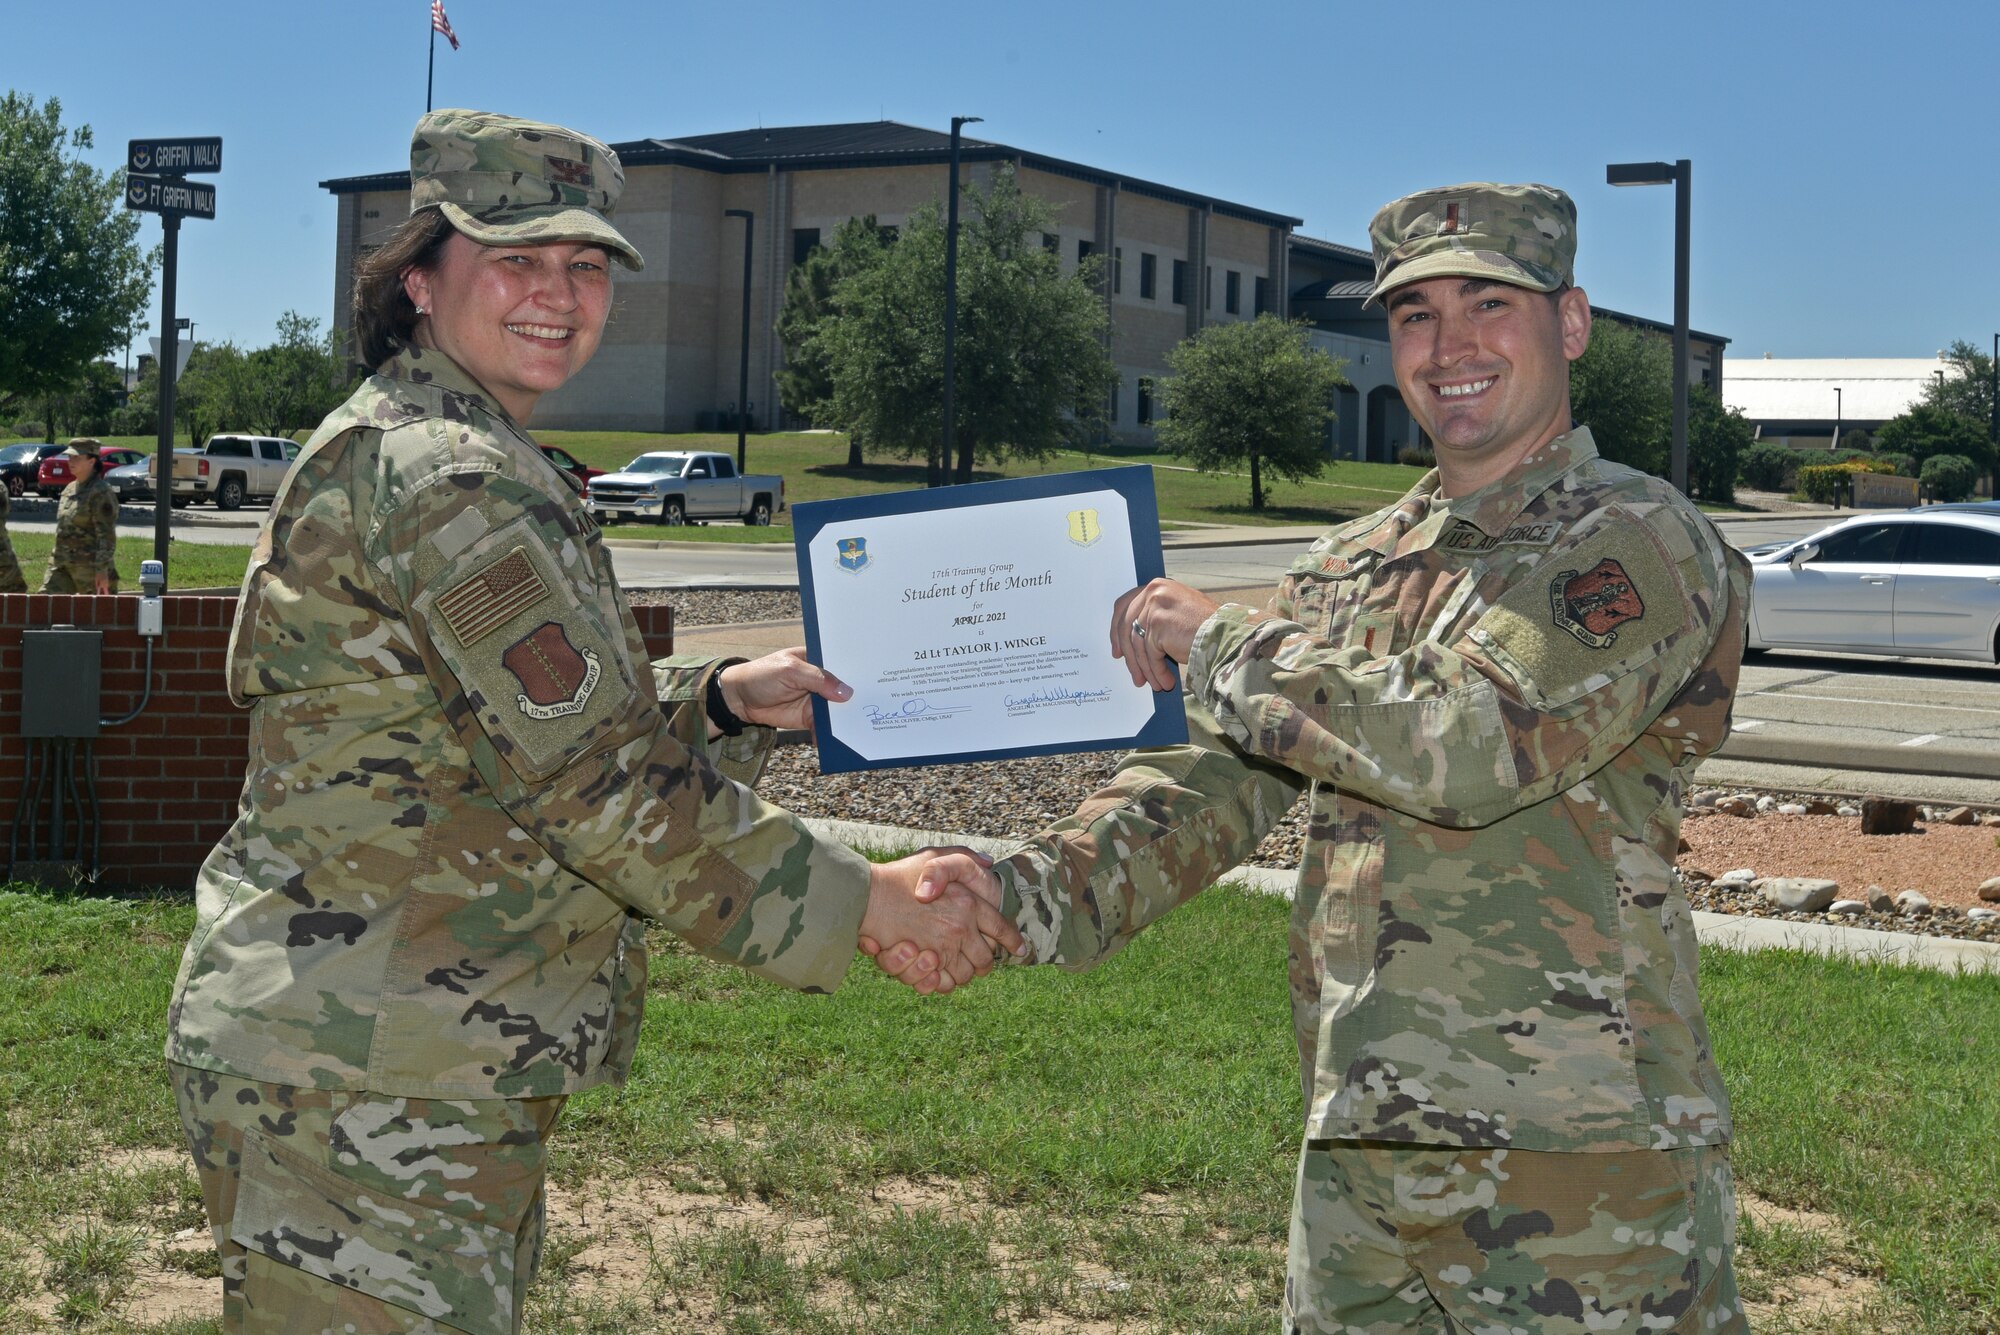 U.S. Air Force Col. Angelina Maguinness, 17th Training Group commander, presents 2nd Lt. Taylor Winge, 315th Training Squadron student, the 17th TRG Student of the Month award for April 2021, outside of the Brandenburg Hall on Goodfellow Air Force Base, Texas, May 21, 2021. The 315th TRS is responsible for training, educating, and mentoring our future intelligence, surveillance, and reconnaissance warriors through innovation. (U.S. Air Force photo by Senior Airman Ashley Thrash)